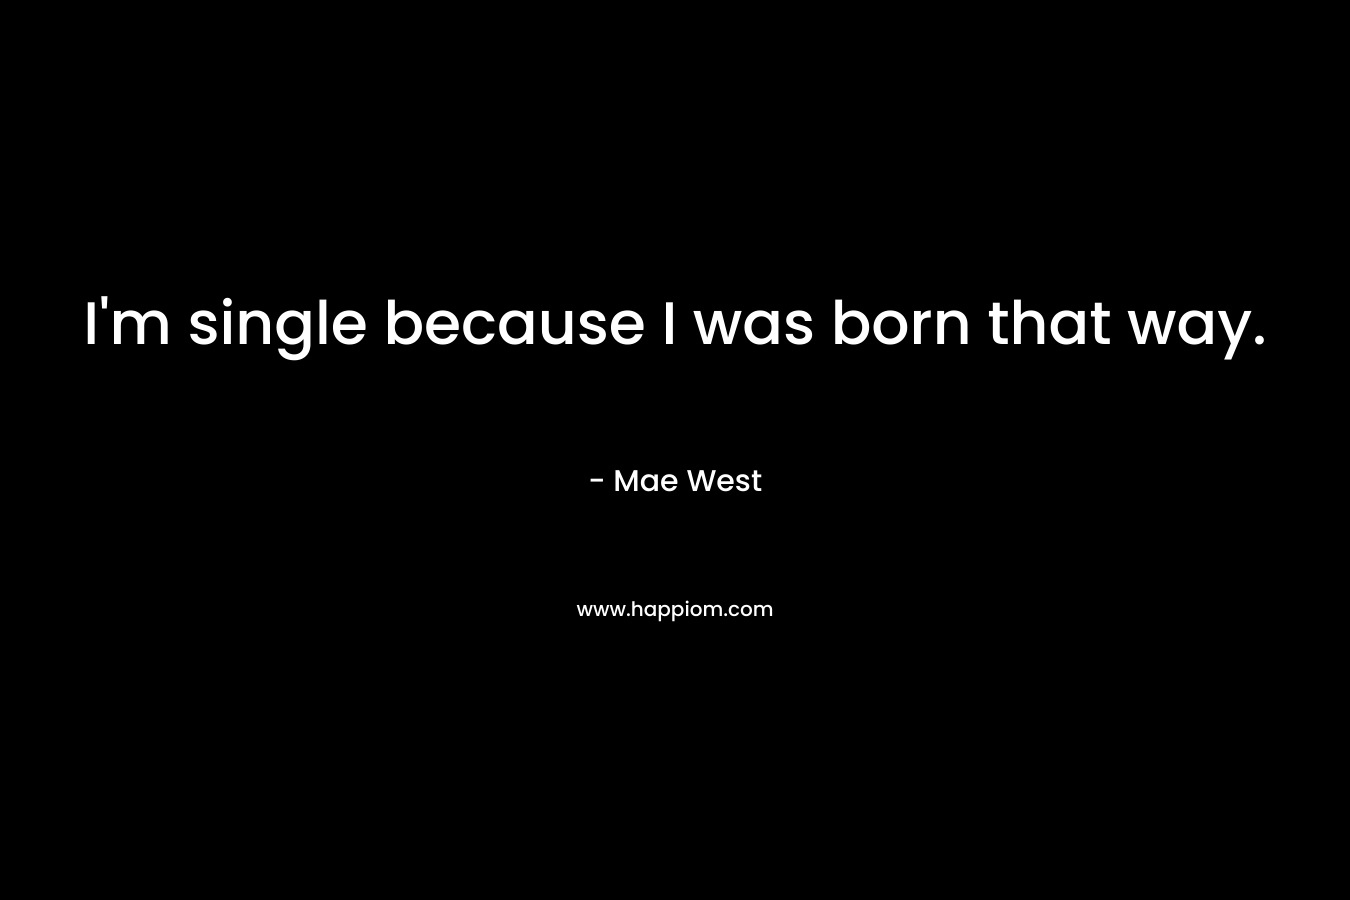 I'm single because I was born that way.